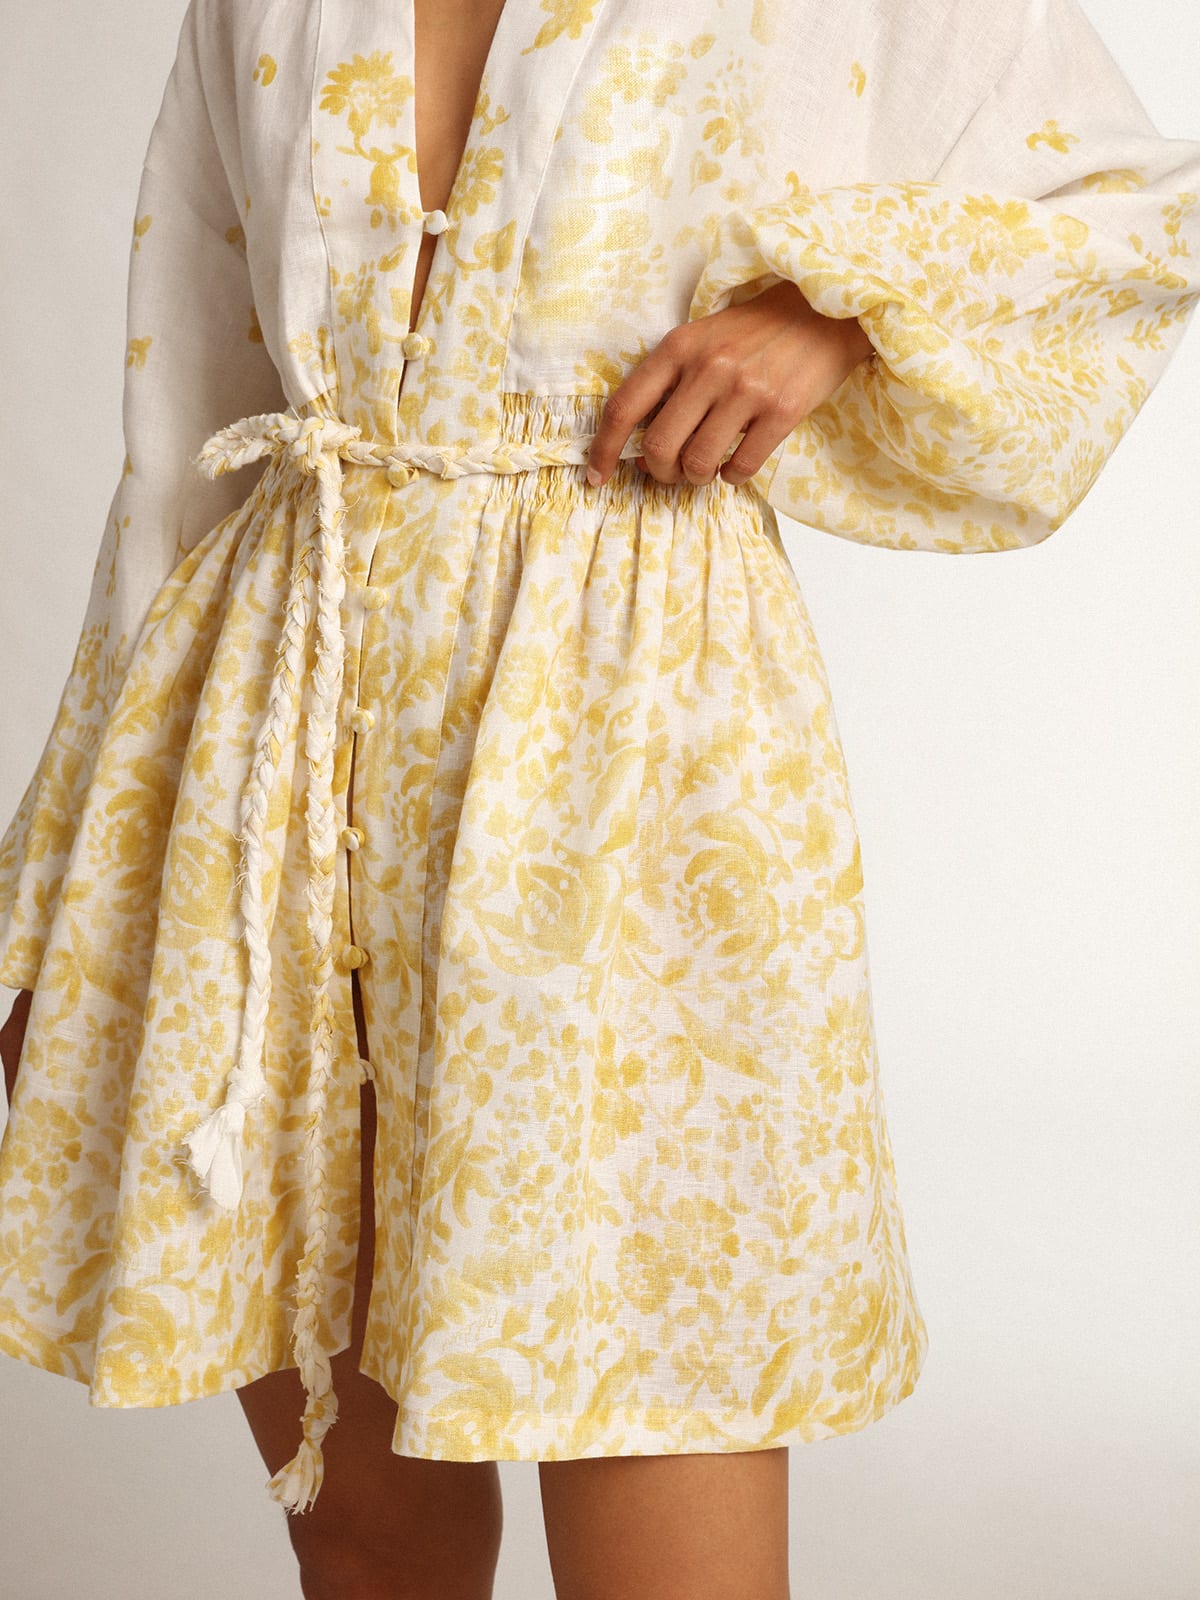 Golden Goose - Resort Collection Mini Dress in linen with lemon yellow print    in 